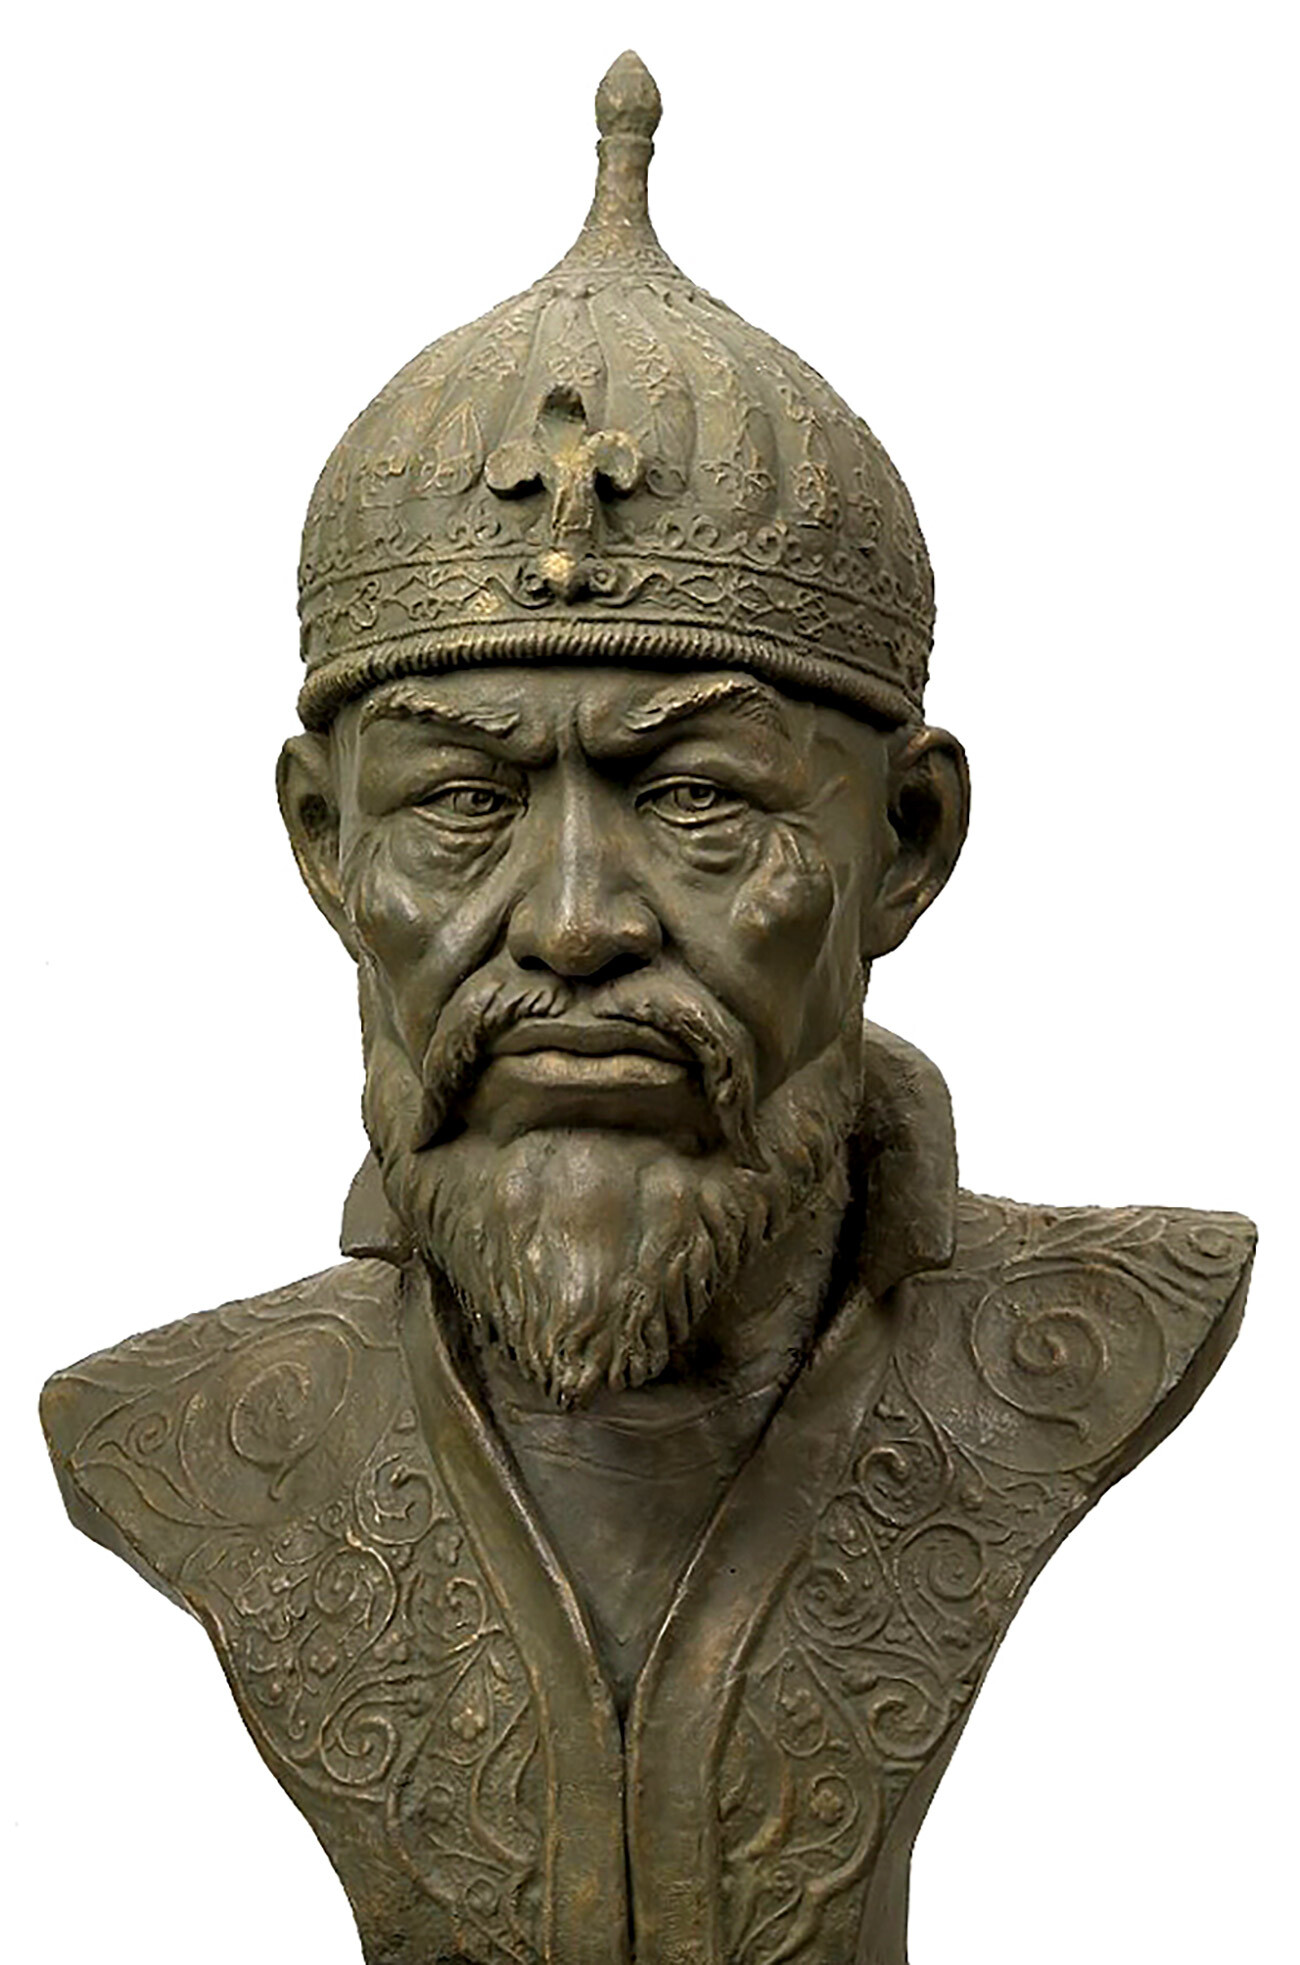 Image of Timur reconstructed by Mikhail Gerasimov in 1941